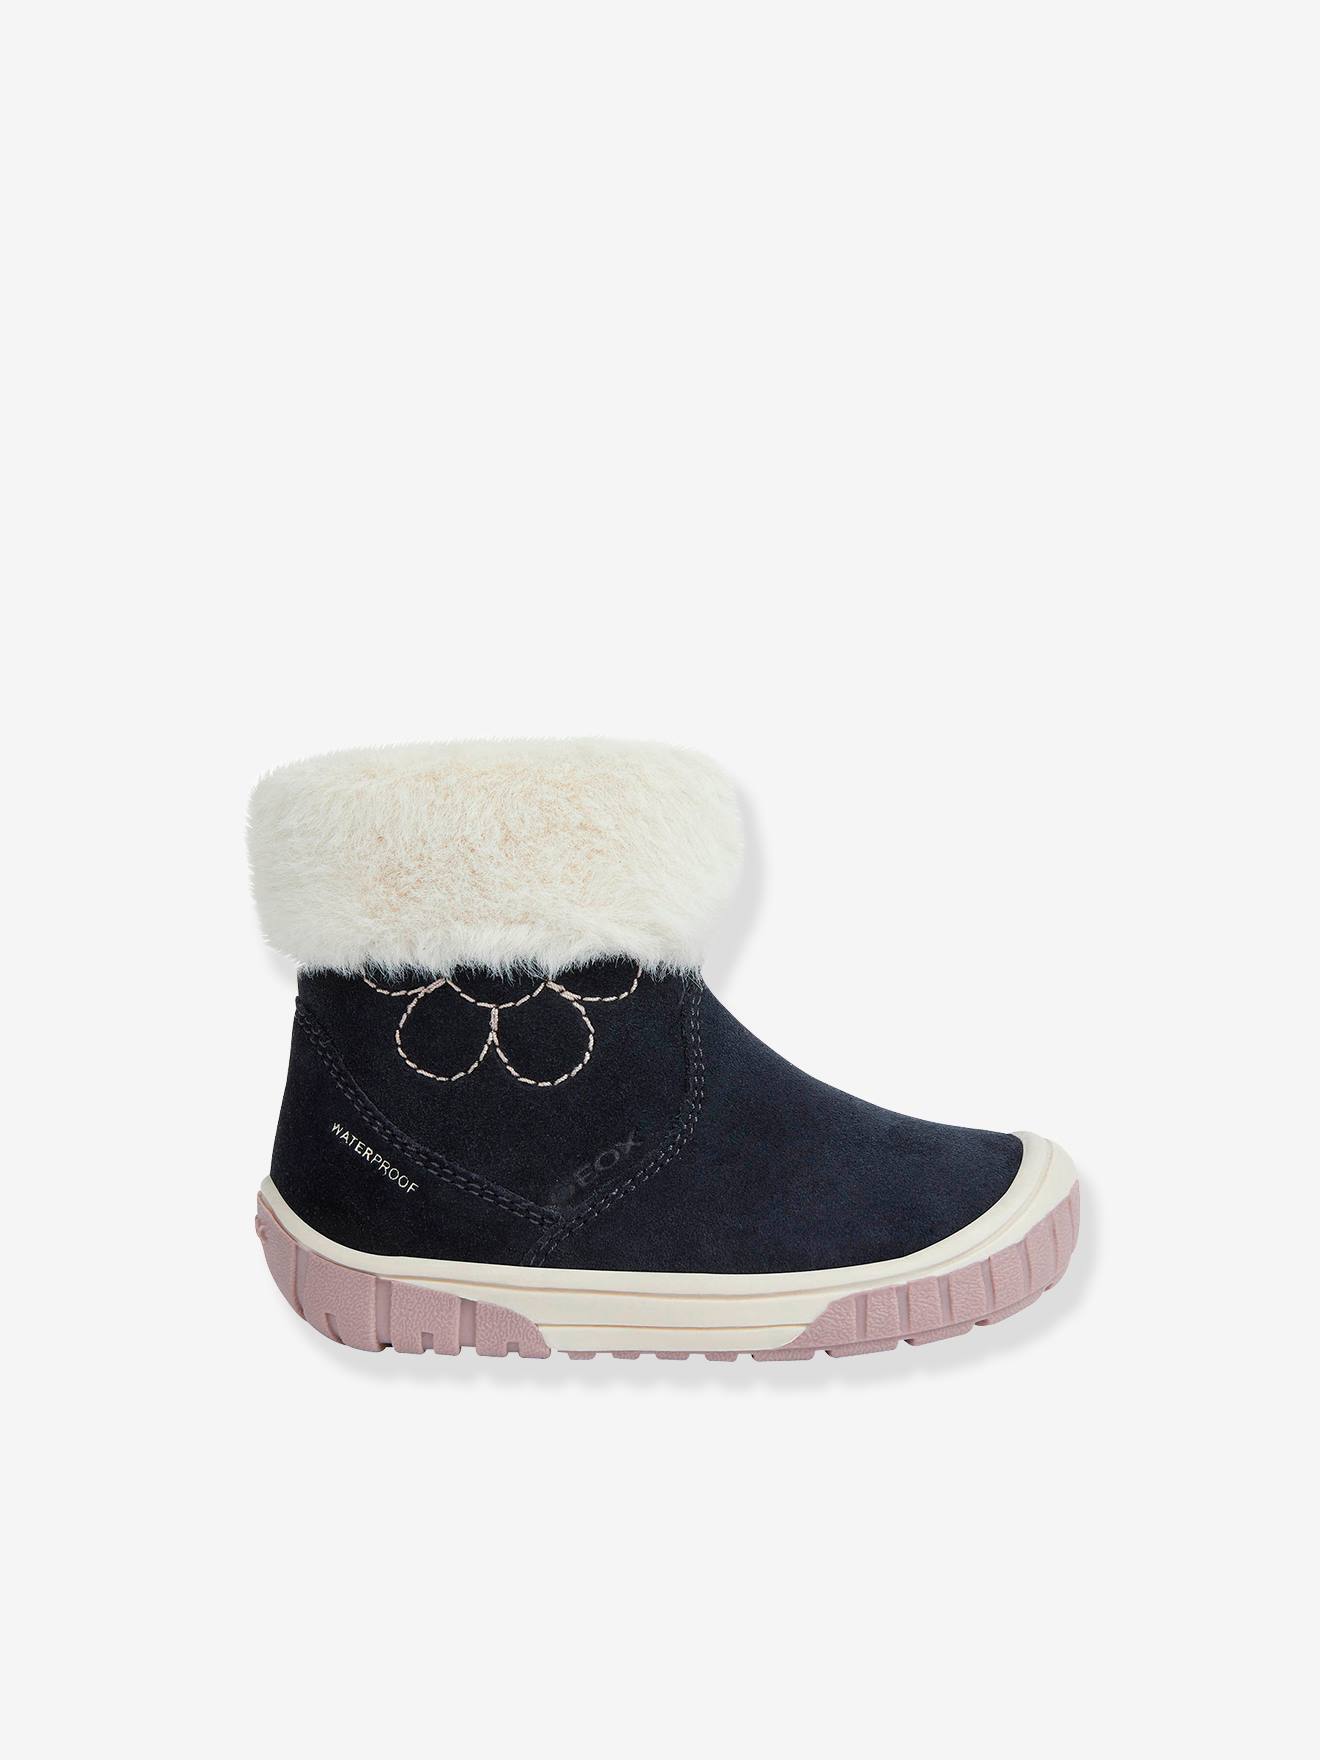 Boots for Baby Girls, Omar Girl WPF by GEOX(r) navy blue